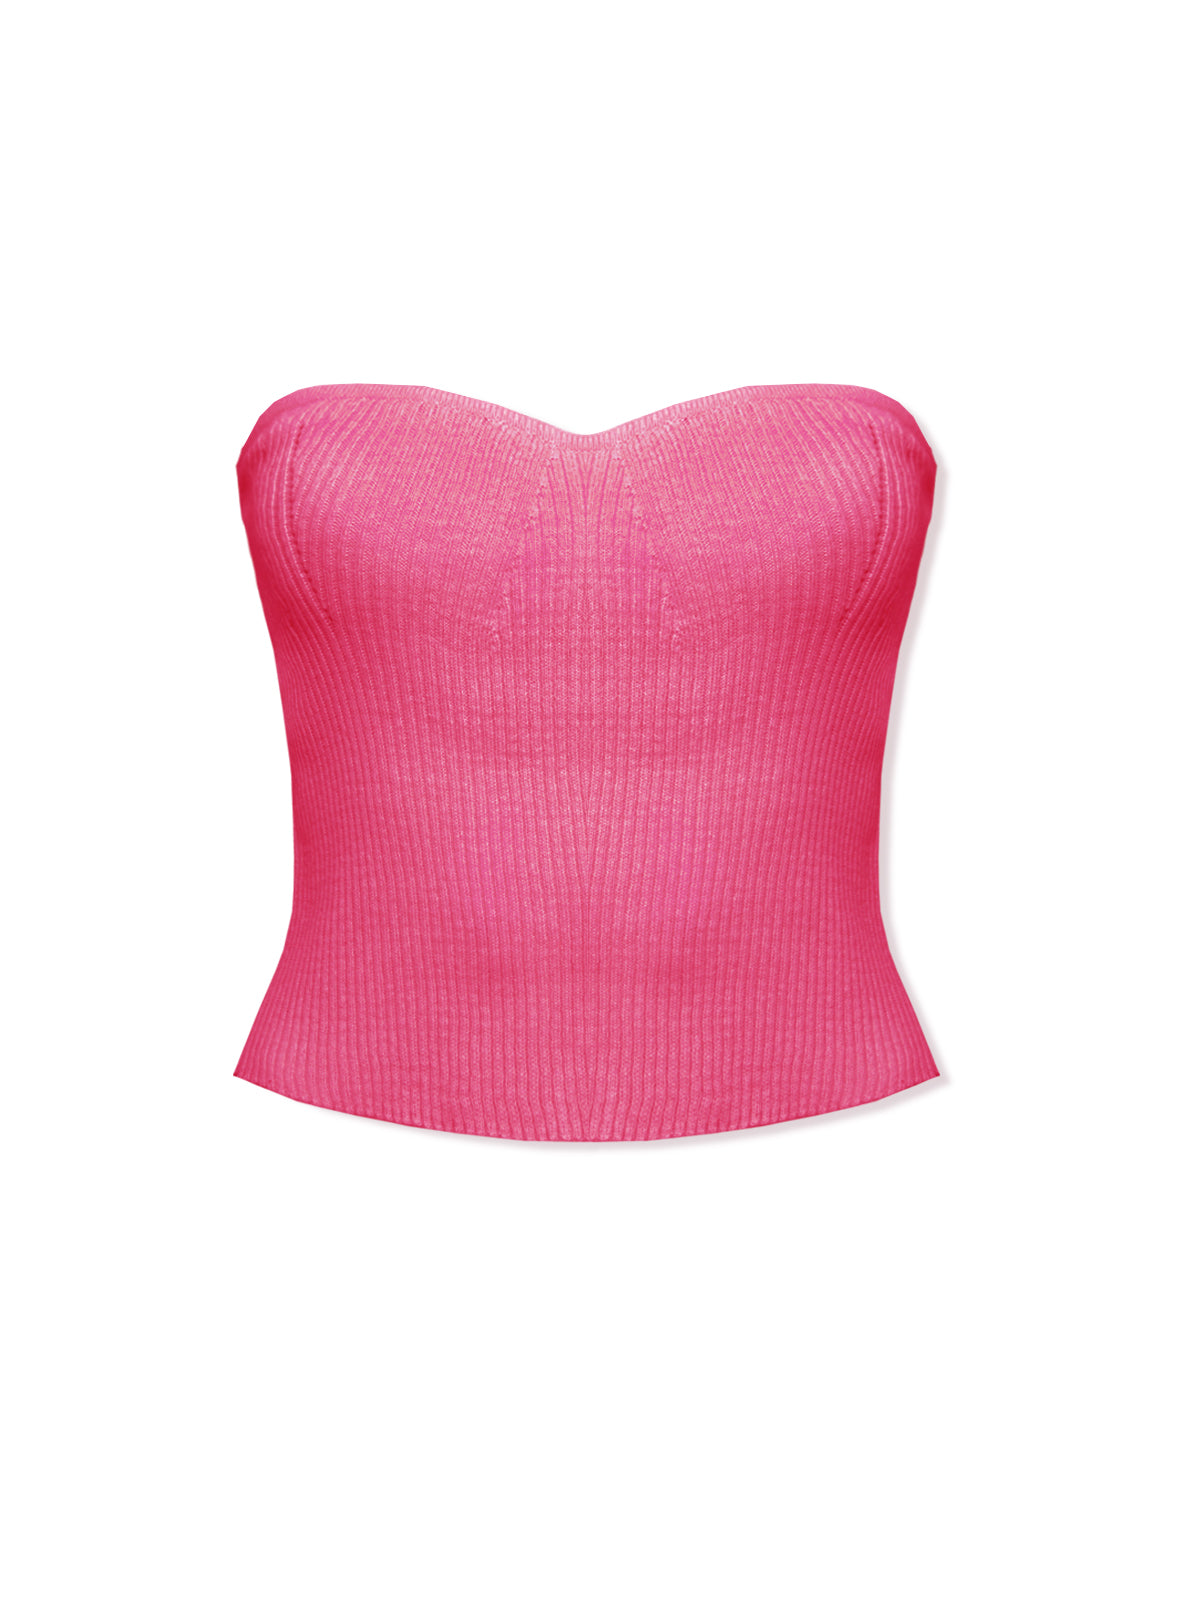 CEDRO knit tube top - bold berry